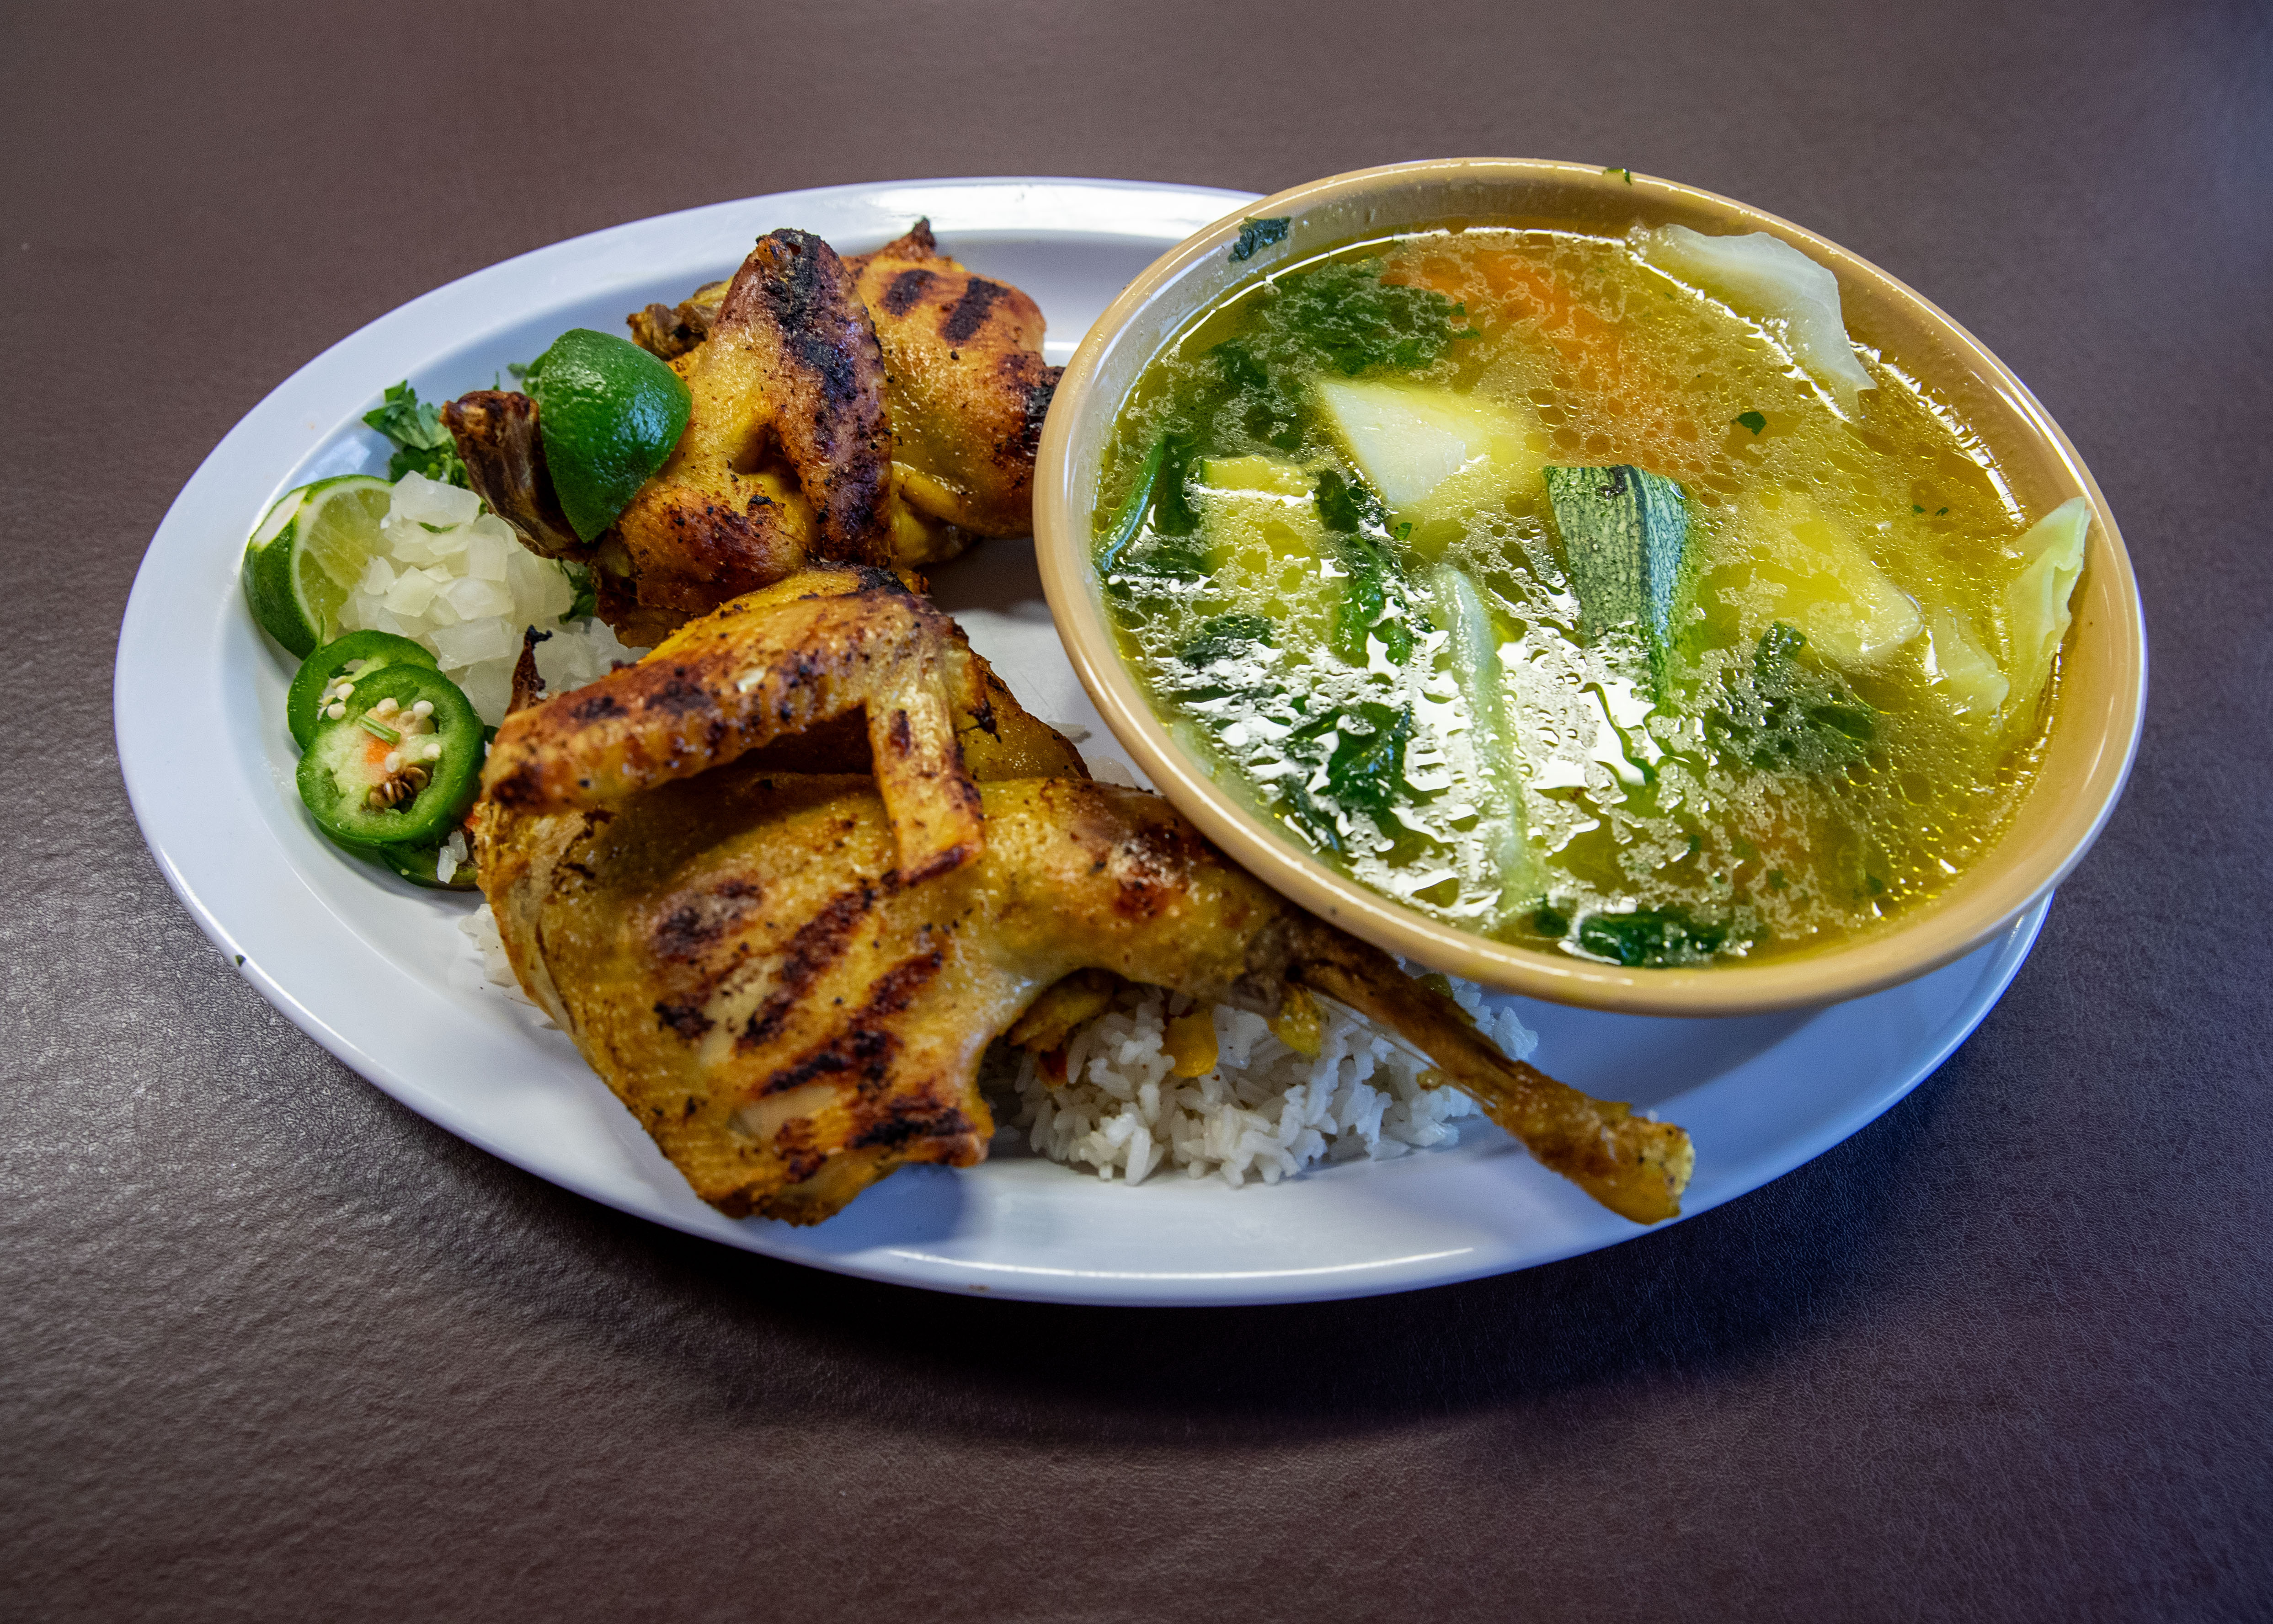 Sopa con Gallino Asada (chicken soup) with roasted Indian hen, rice, onion, lime and jalapeño for $19.99 at Pupuseria El Salvador in Wyoming on Thursday, Oct. 19, 2023. (Cory Morse | MLive.com)

